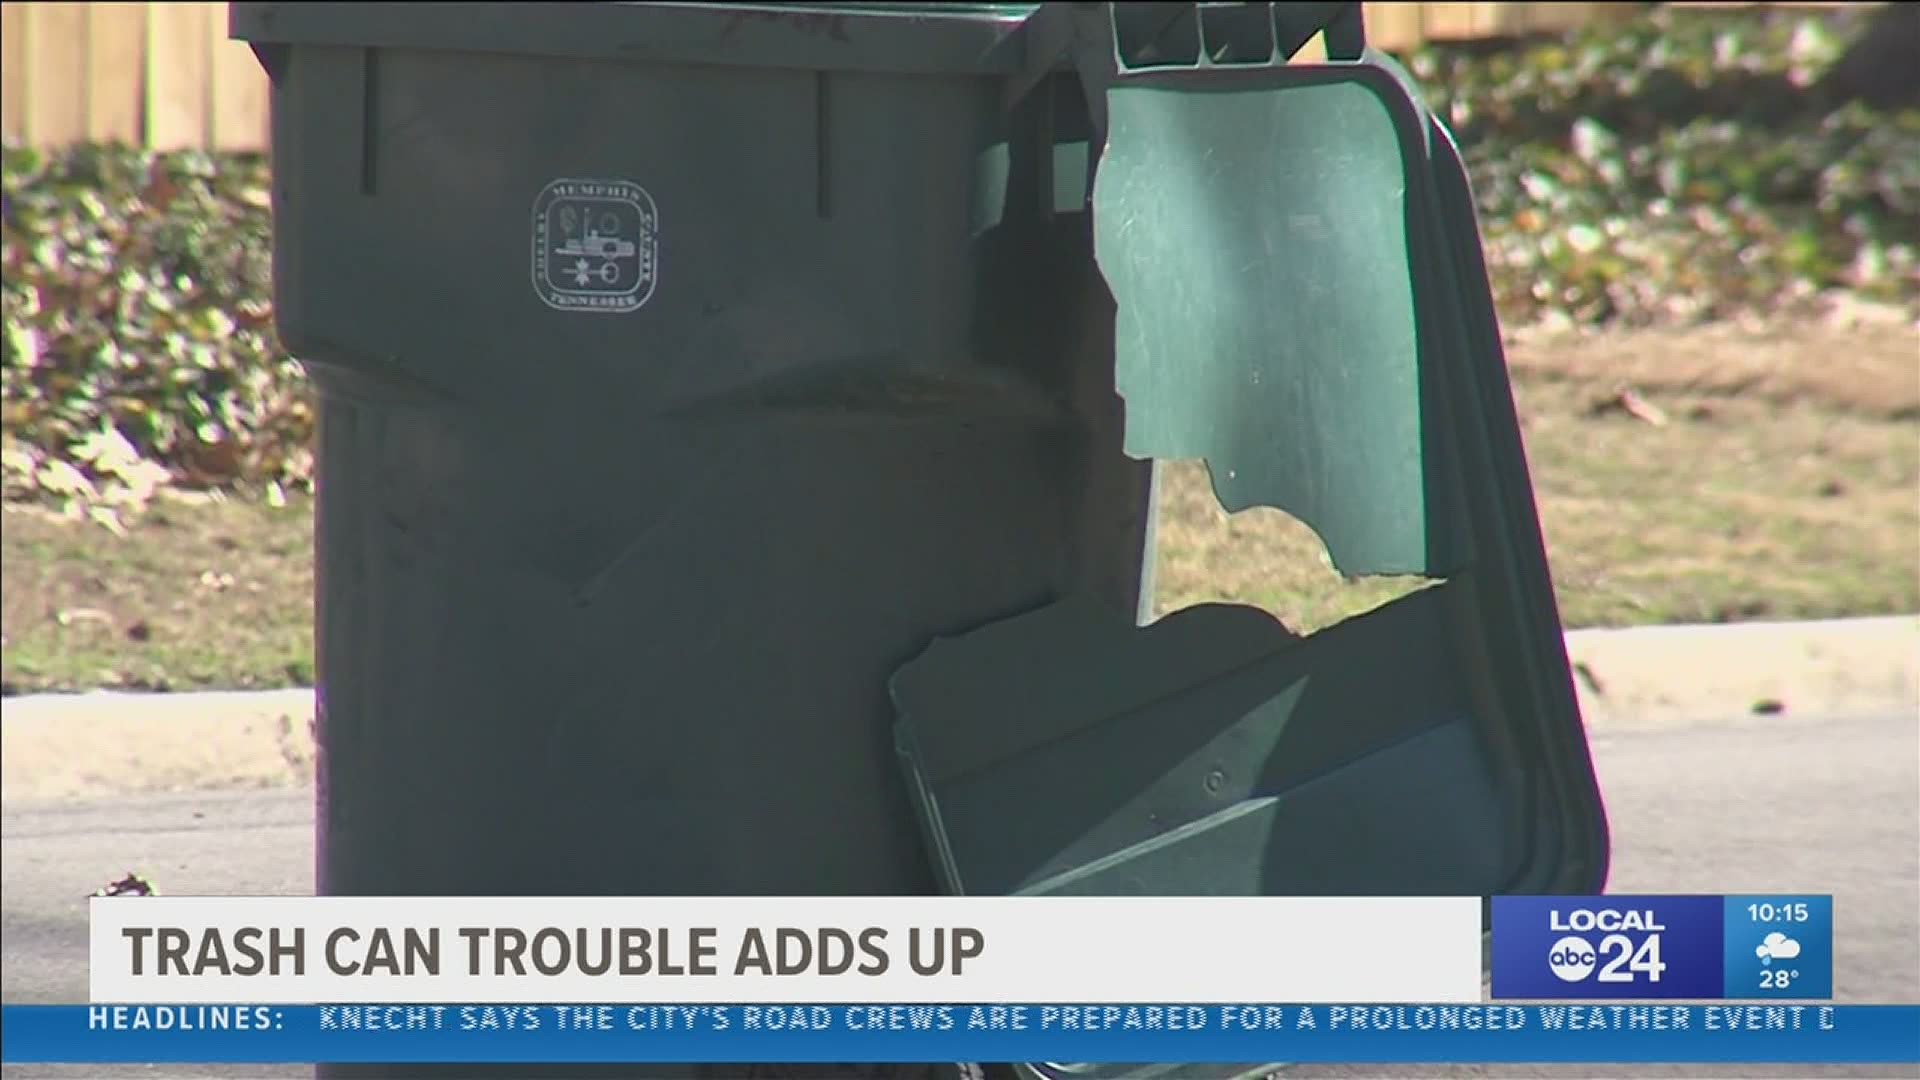 Morning Woods homeowners turned to the Local I-Team to find out why there are so many broken trash and recycling bins in their neighborhood.